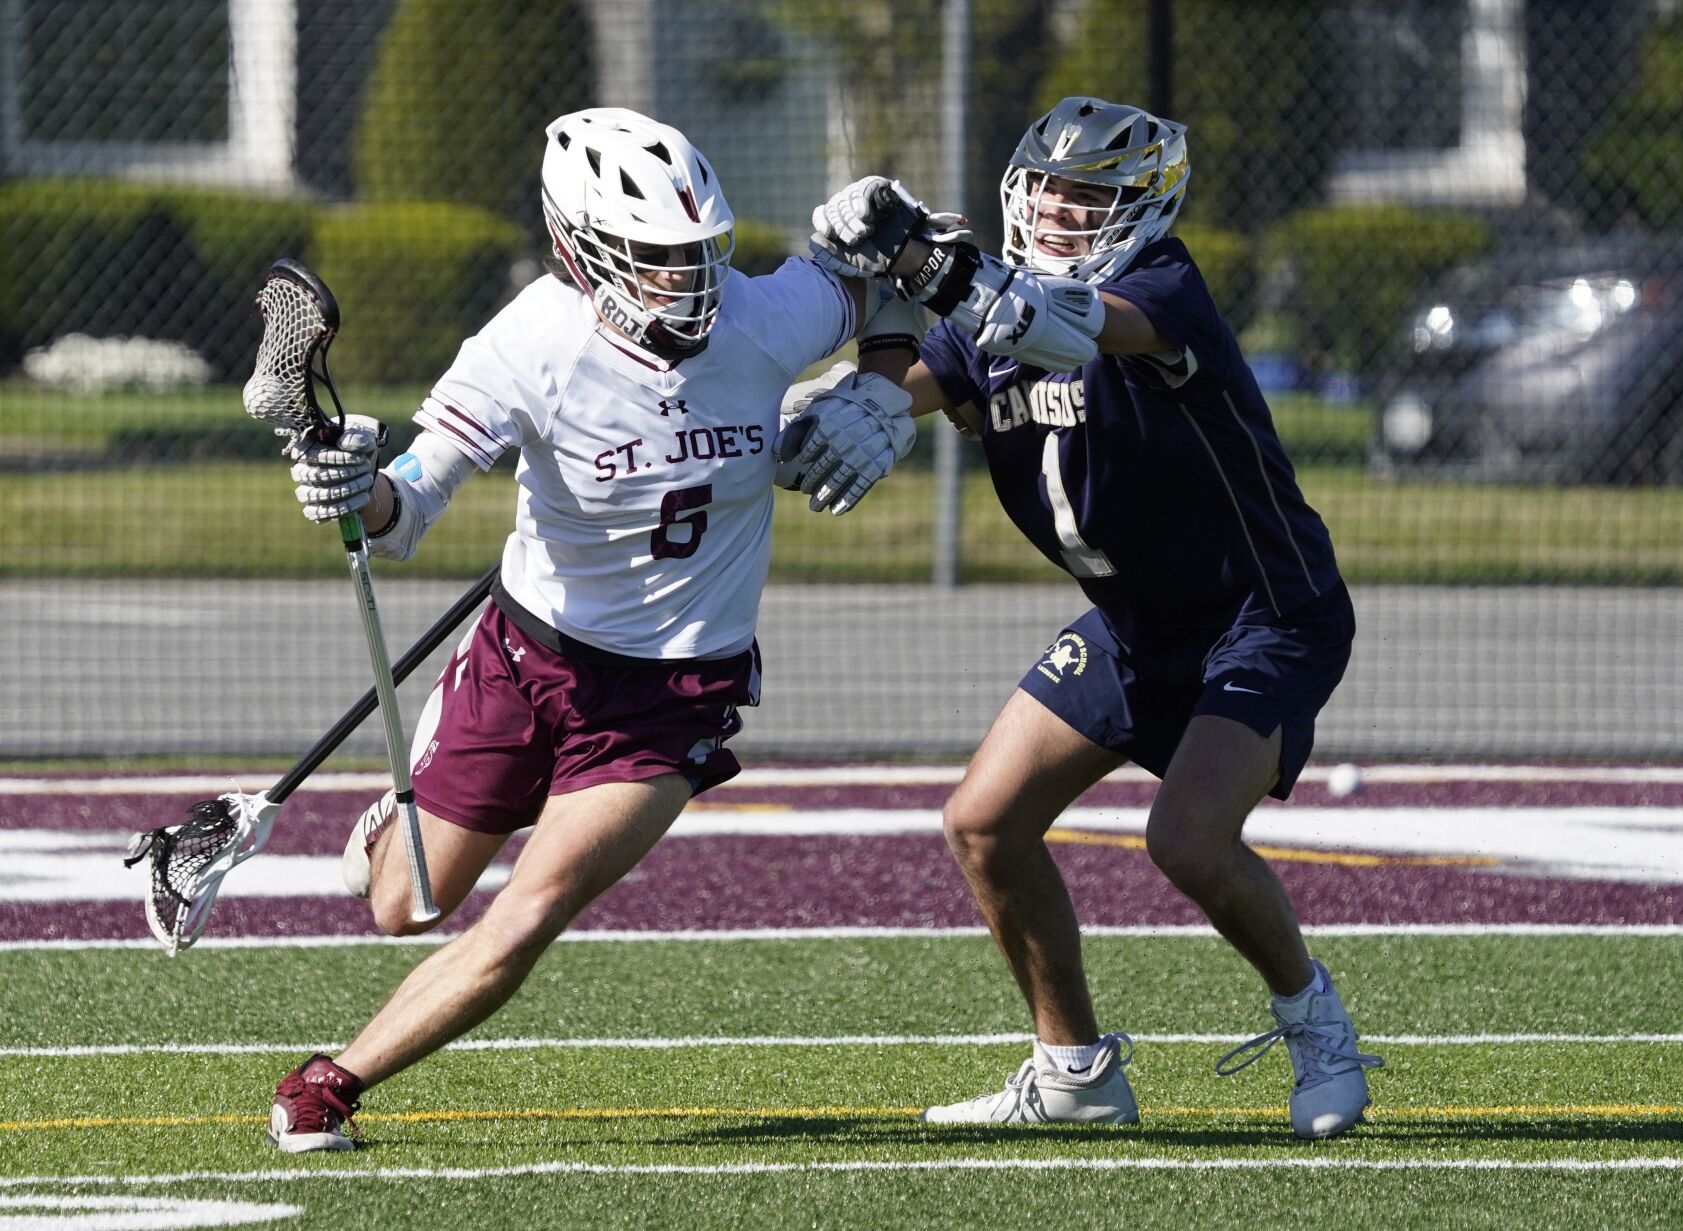 Orchard Park, St. Joe’s close at top of WNY Boys Lacrosse Poll